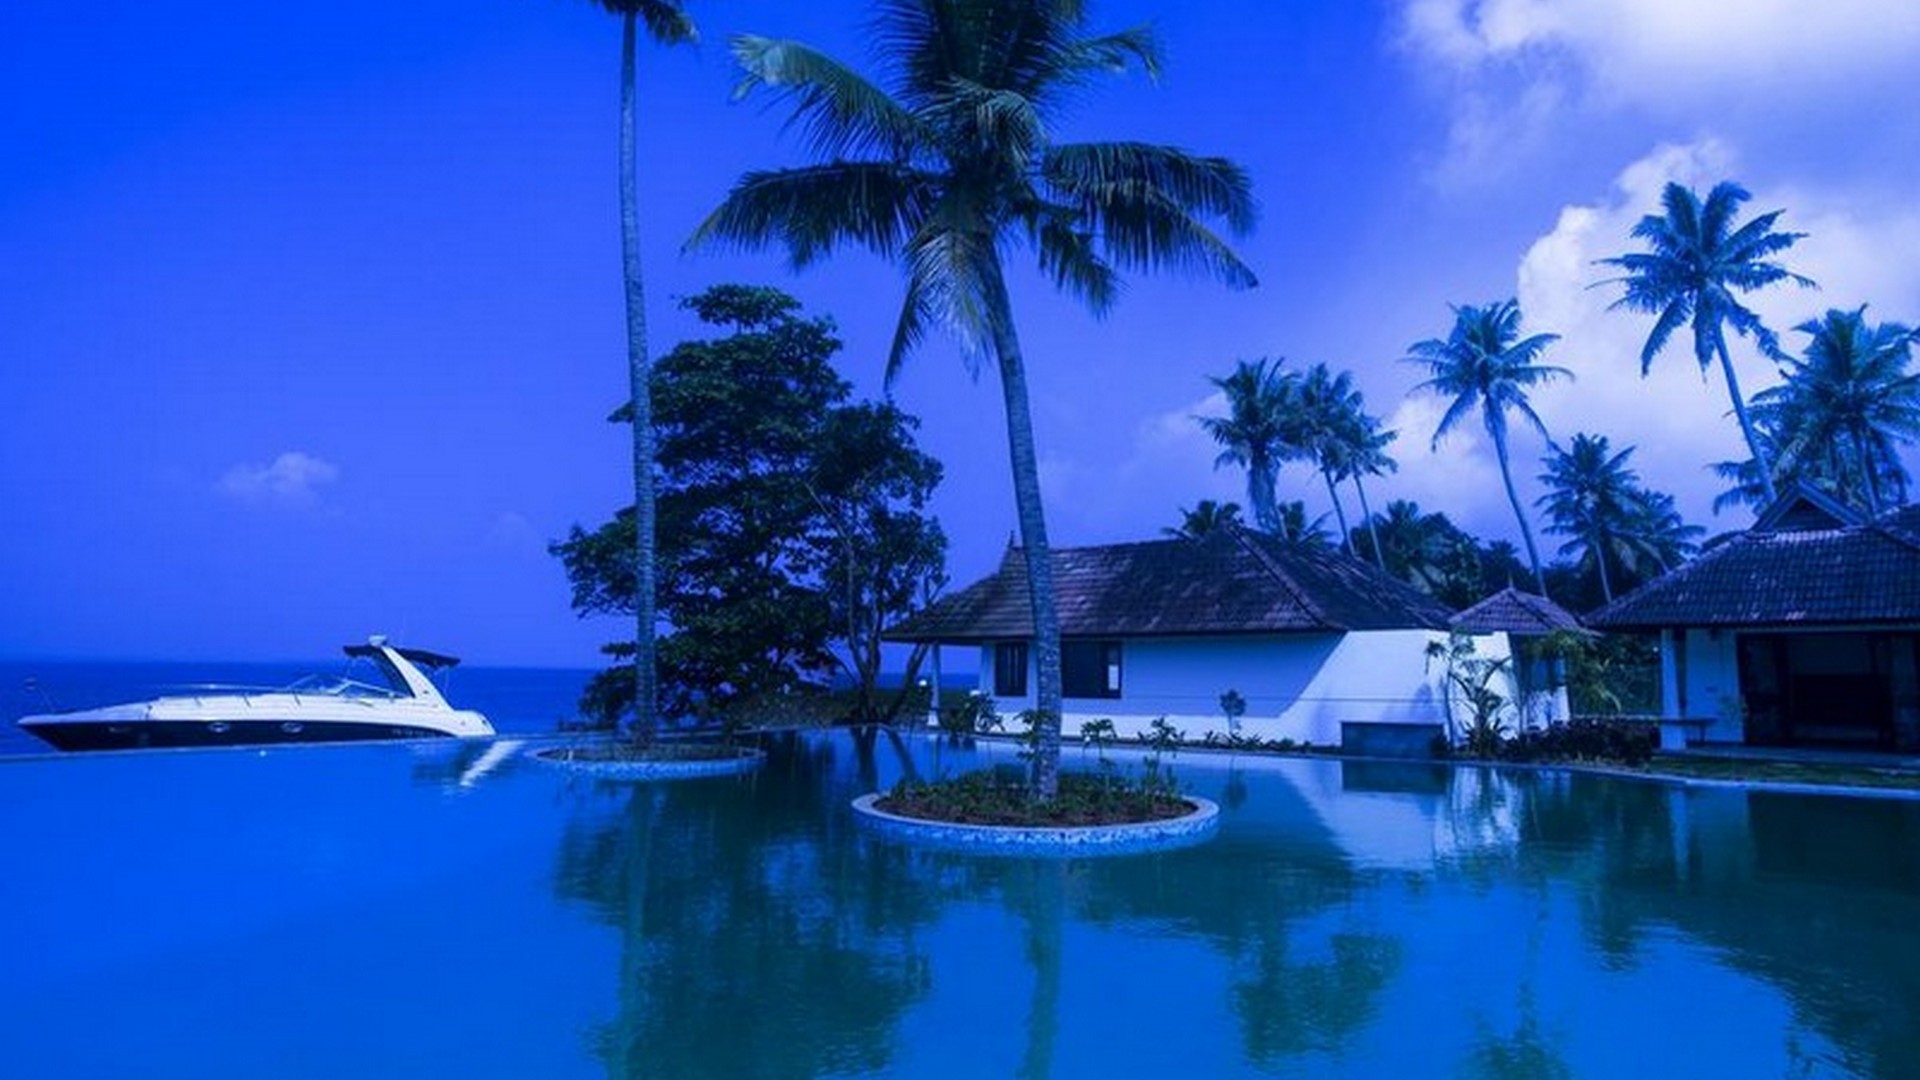 💸 Kerala Trip Cost- How much does it cost for a Kerala Holiday?